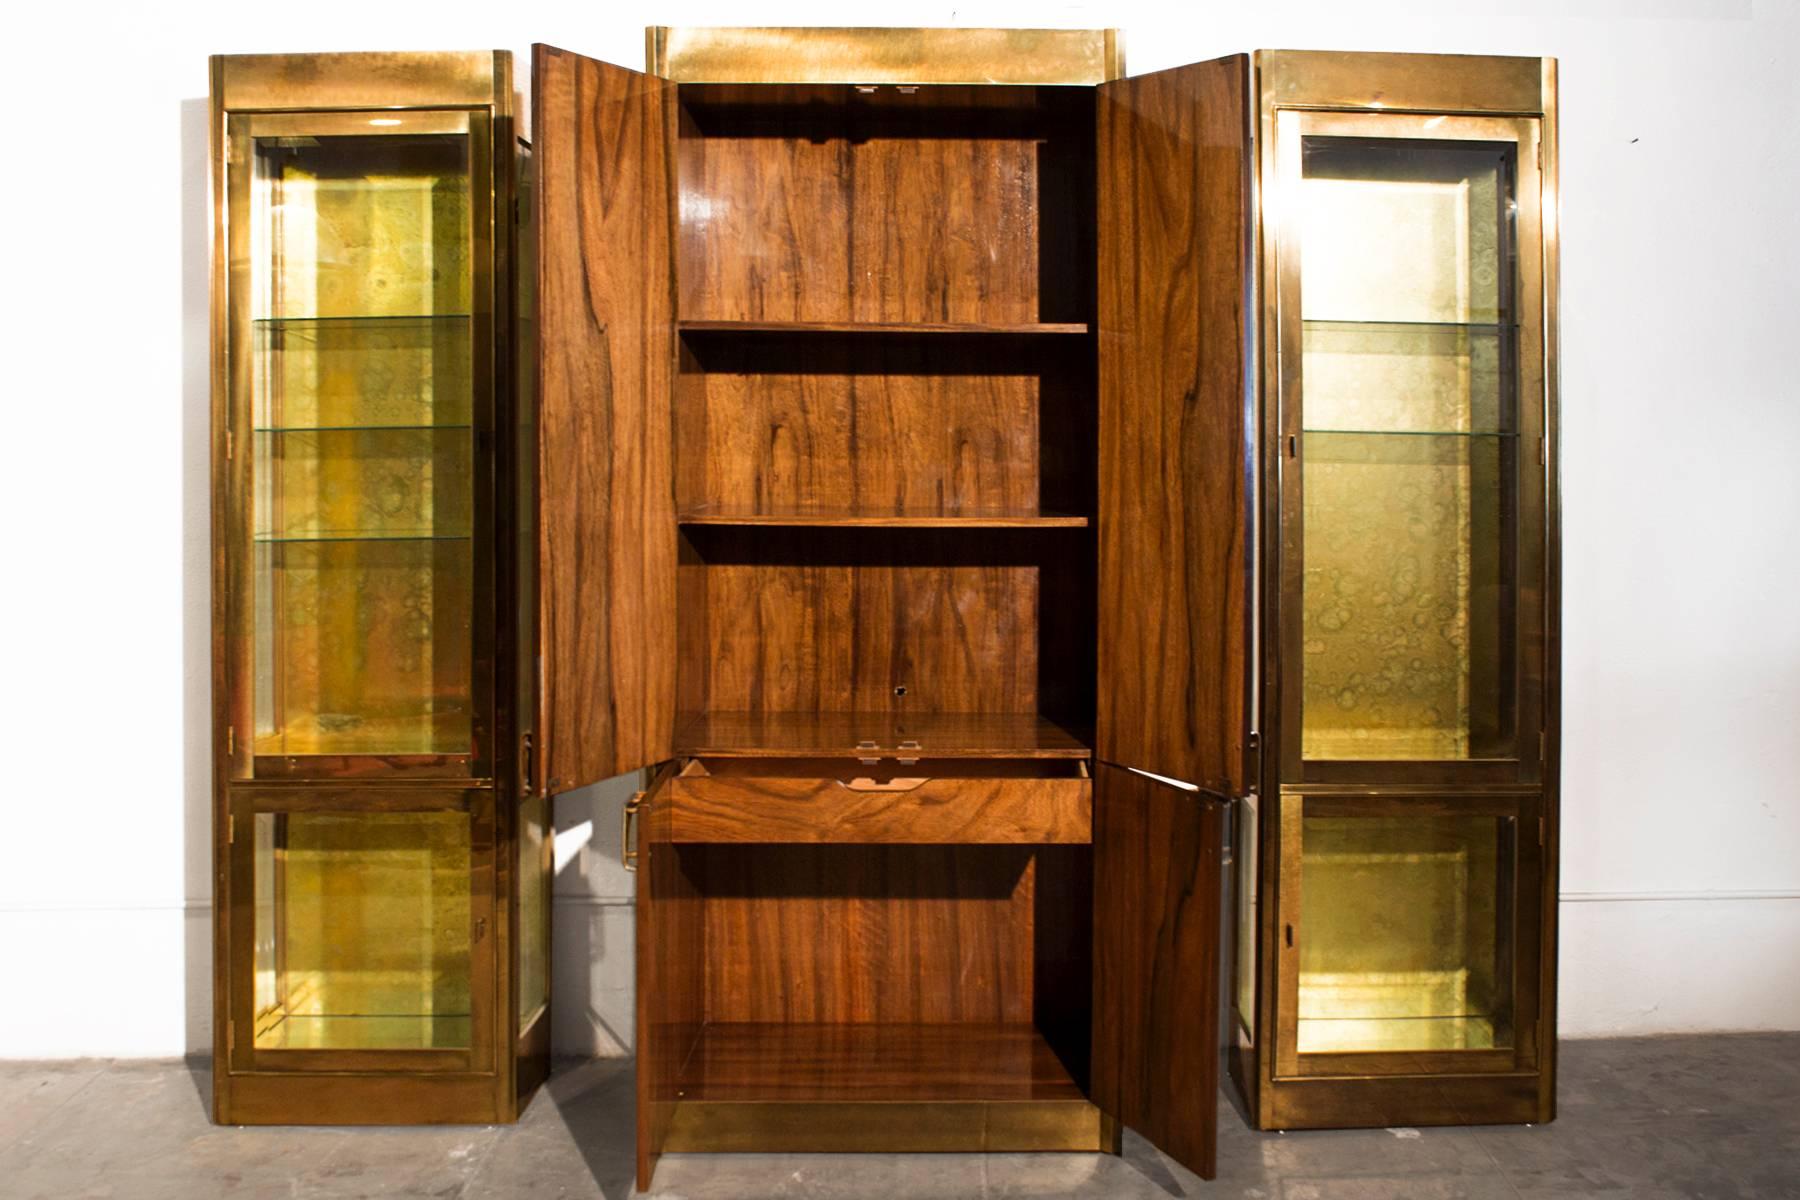 Rare three-piece set of mastercraft ebano wood and antique brass display cabinets from a Brentwood, CA Estate. Custom ordered for a 20th Century Fox Executive in 1983. Set consists of:
Large storage cabinet “model # 1850” ebano wood, antique brass